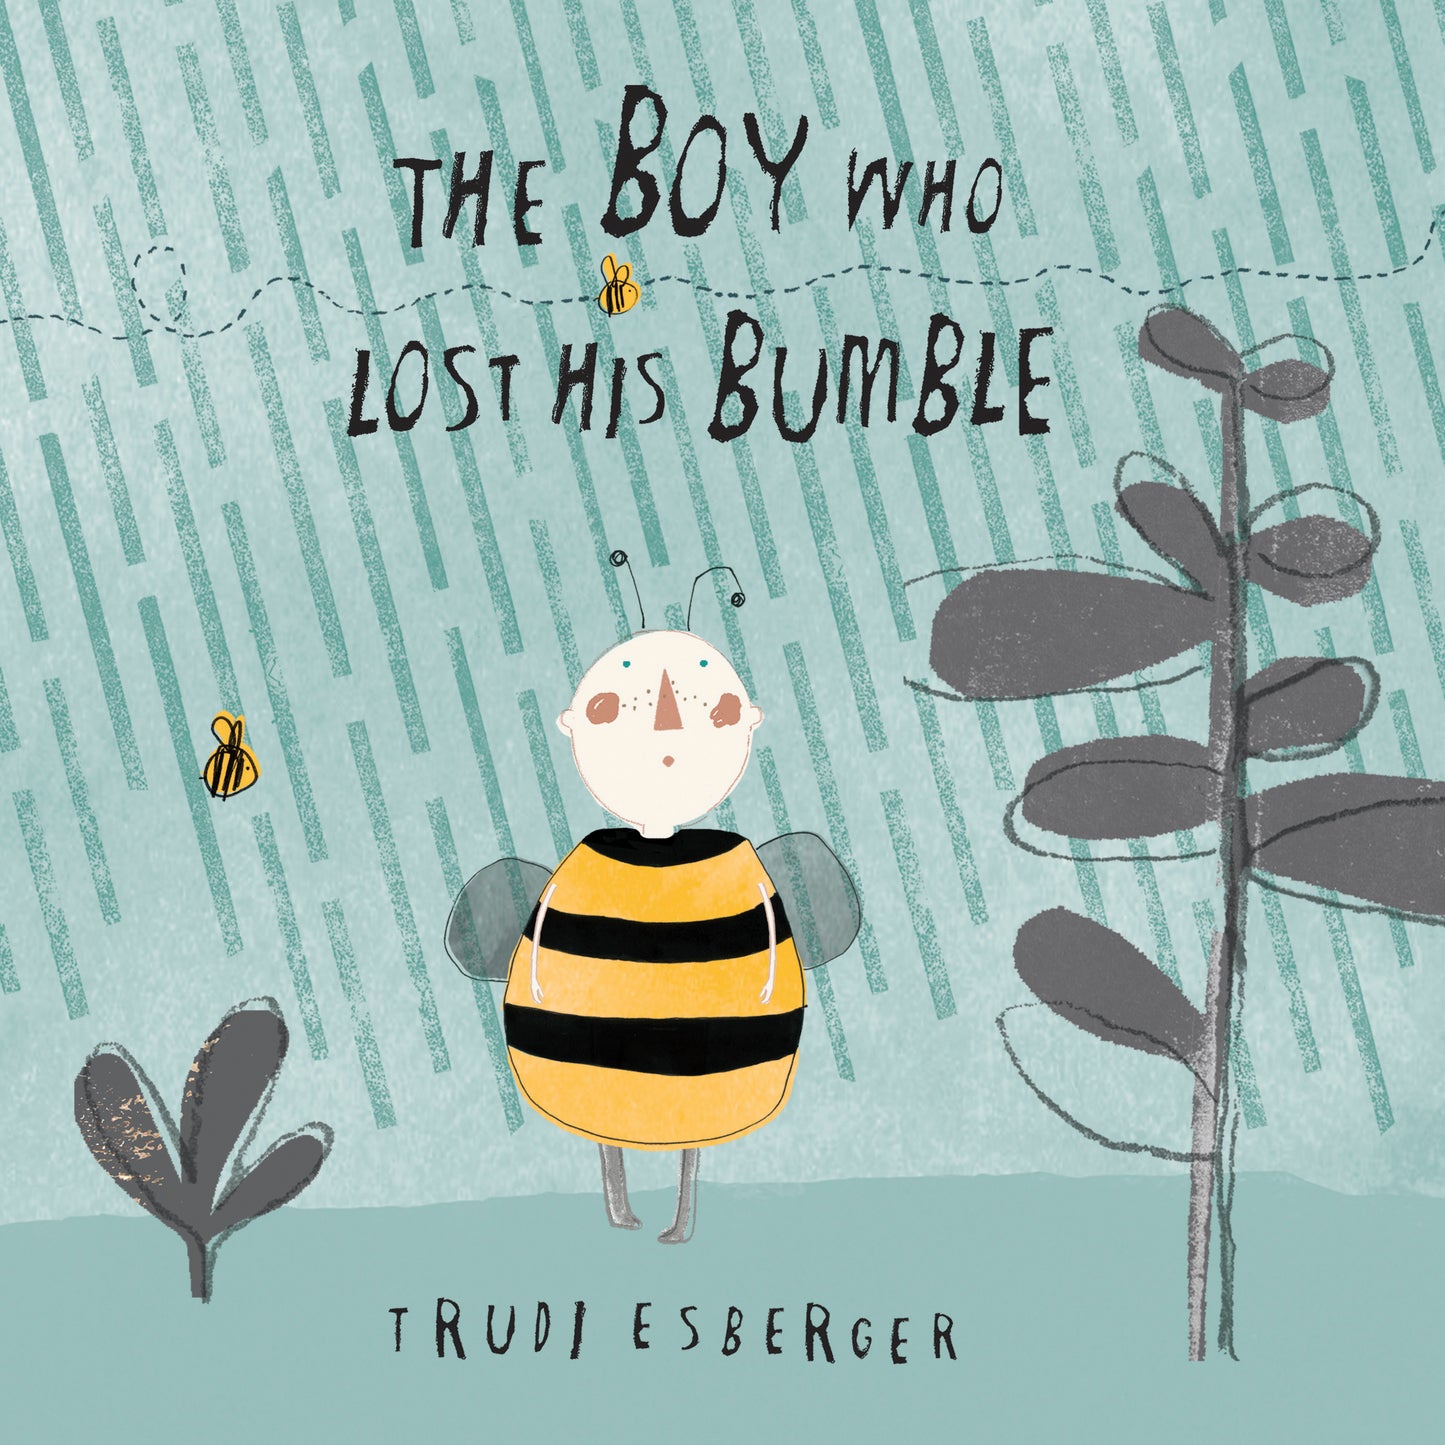 The Boy who lost his Bumble